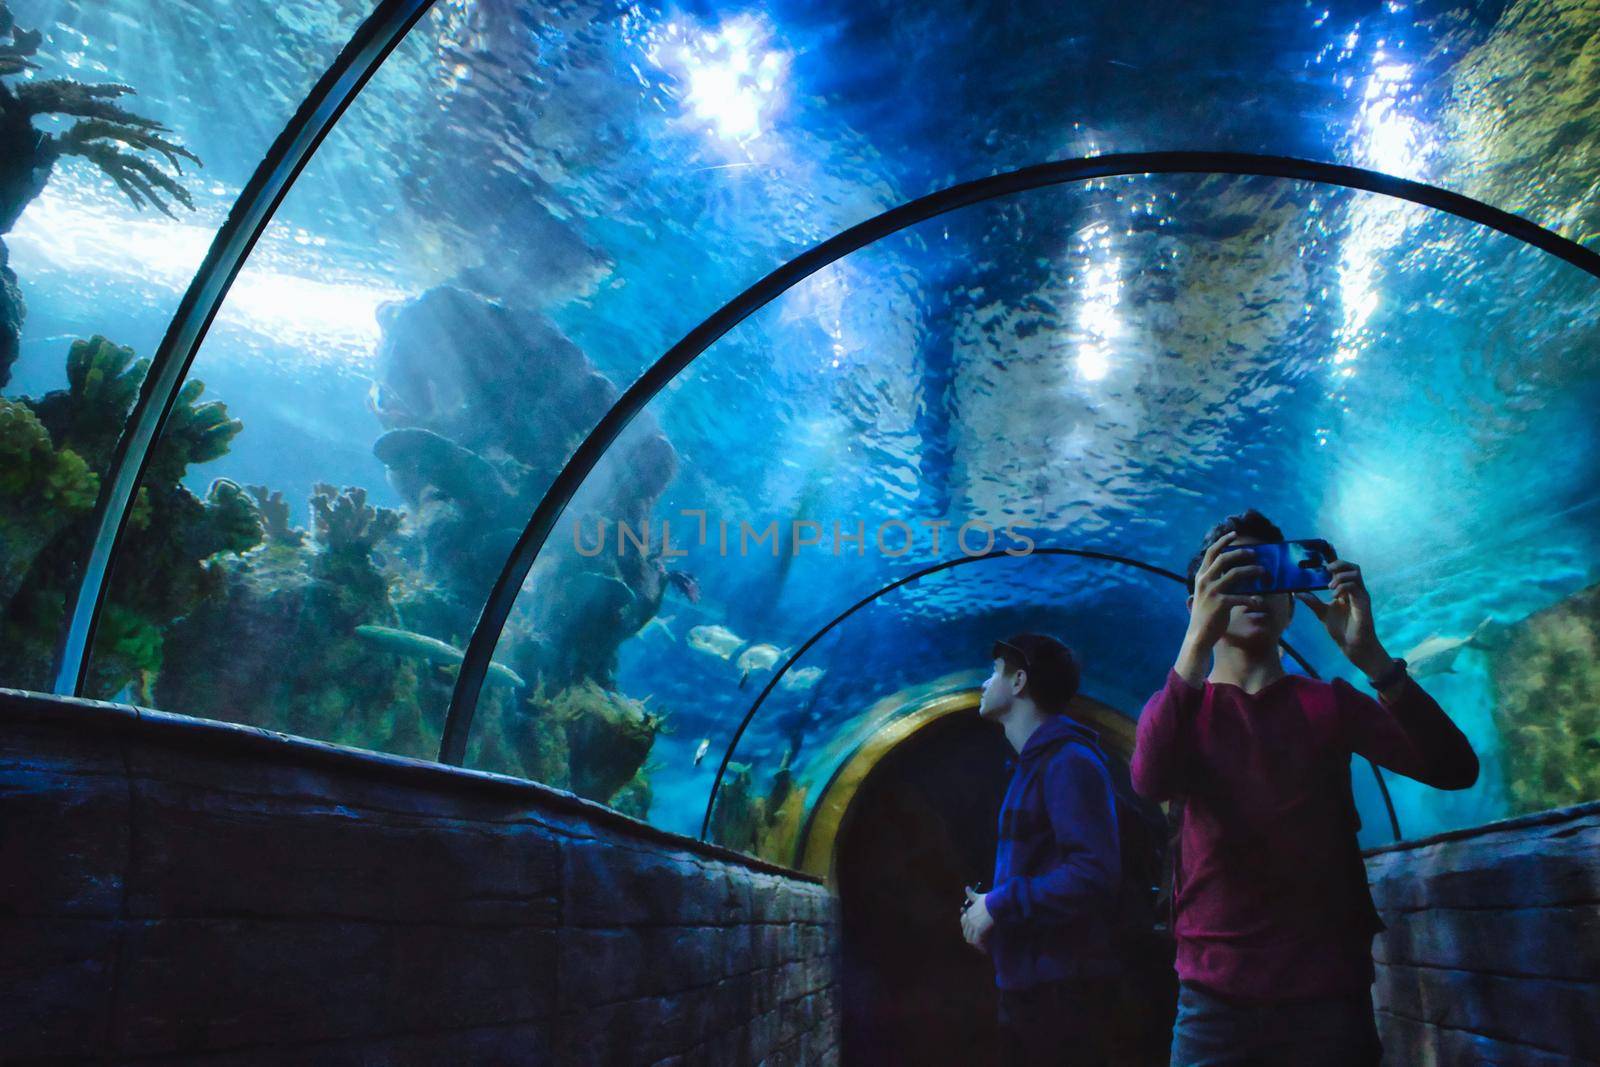 Qawra / Malta - November 22 2019: Teenagers taking photos from inside the tunnel at the National Aquarium, Malta by tennesseewitney